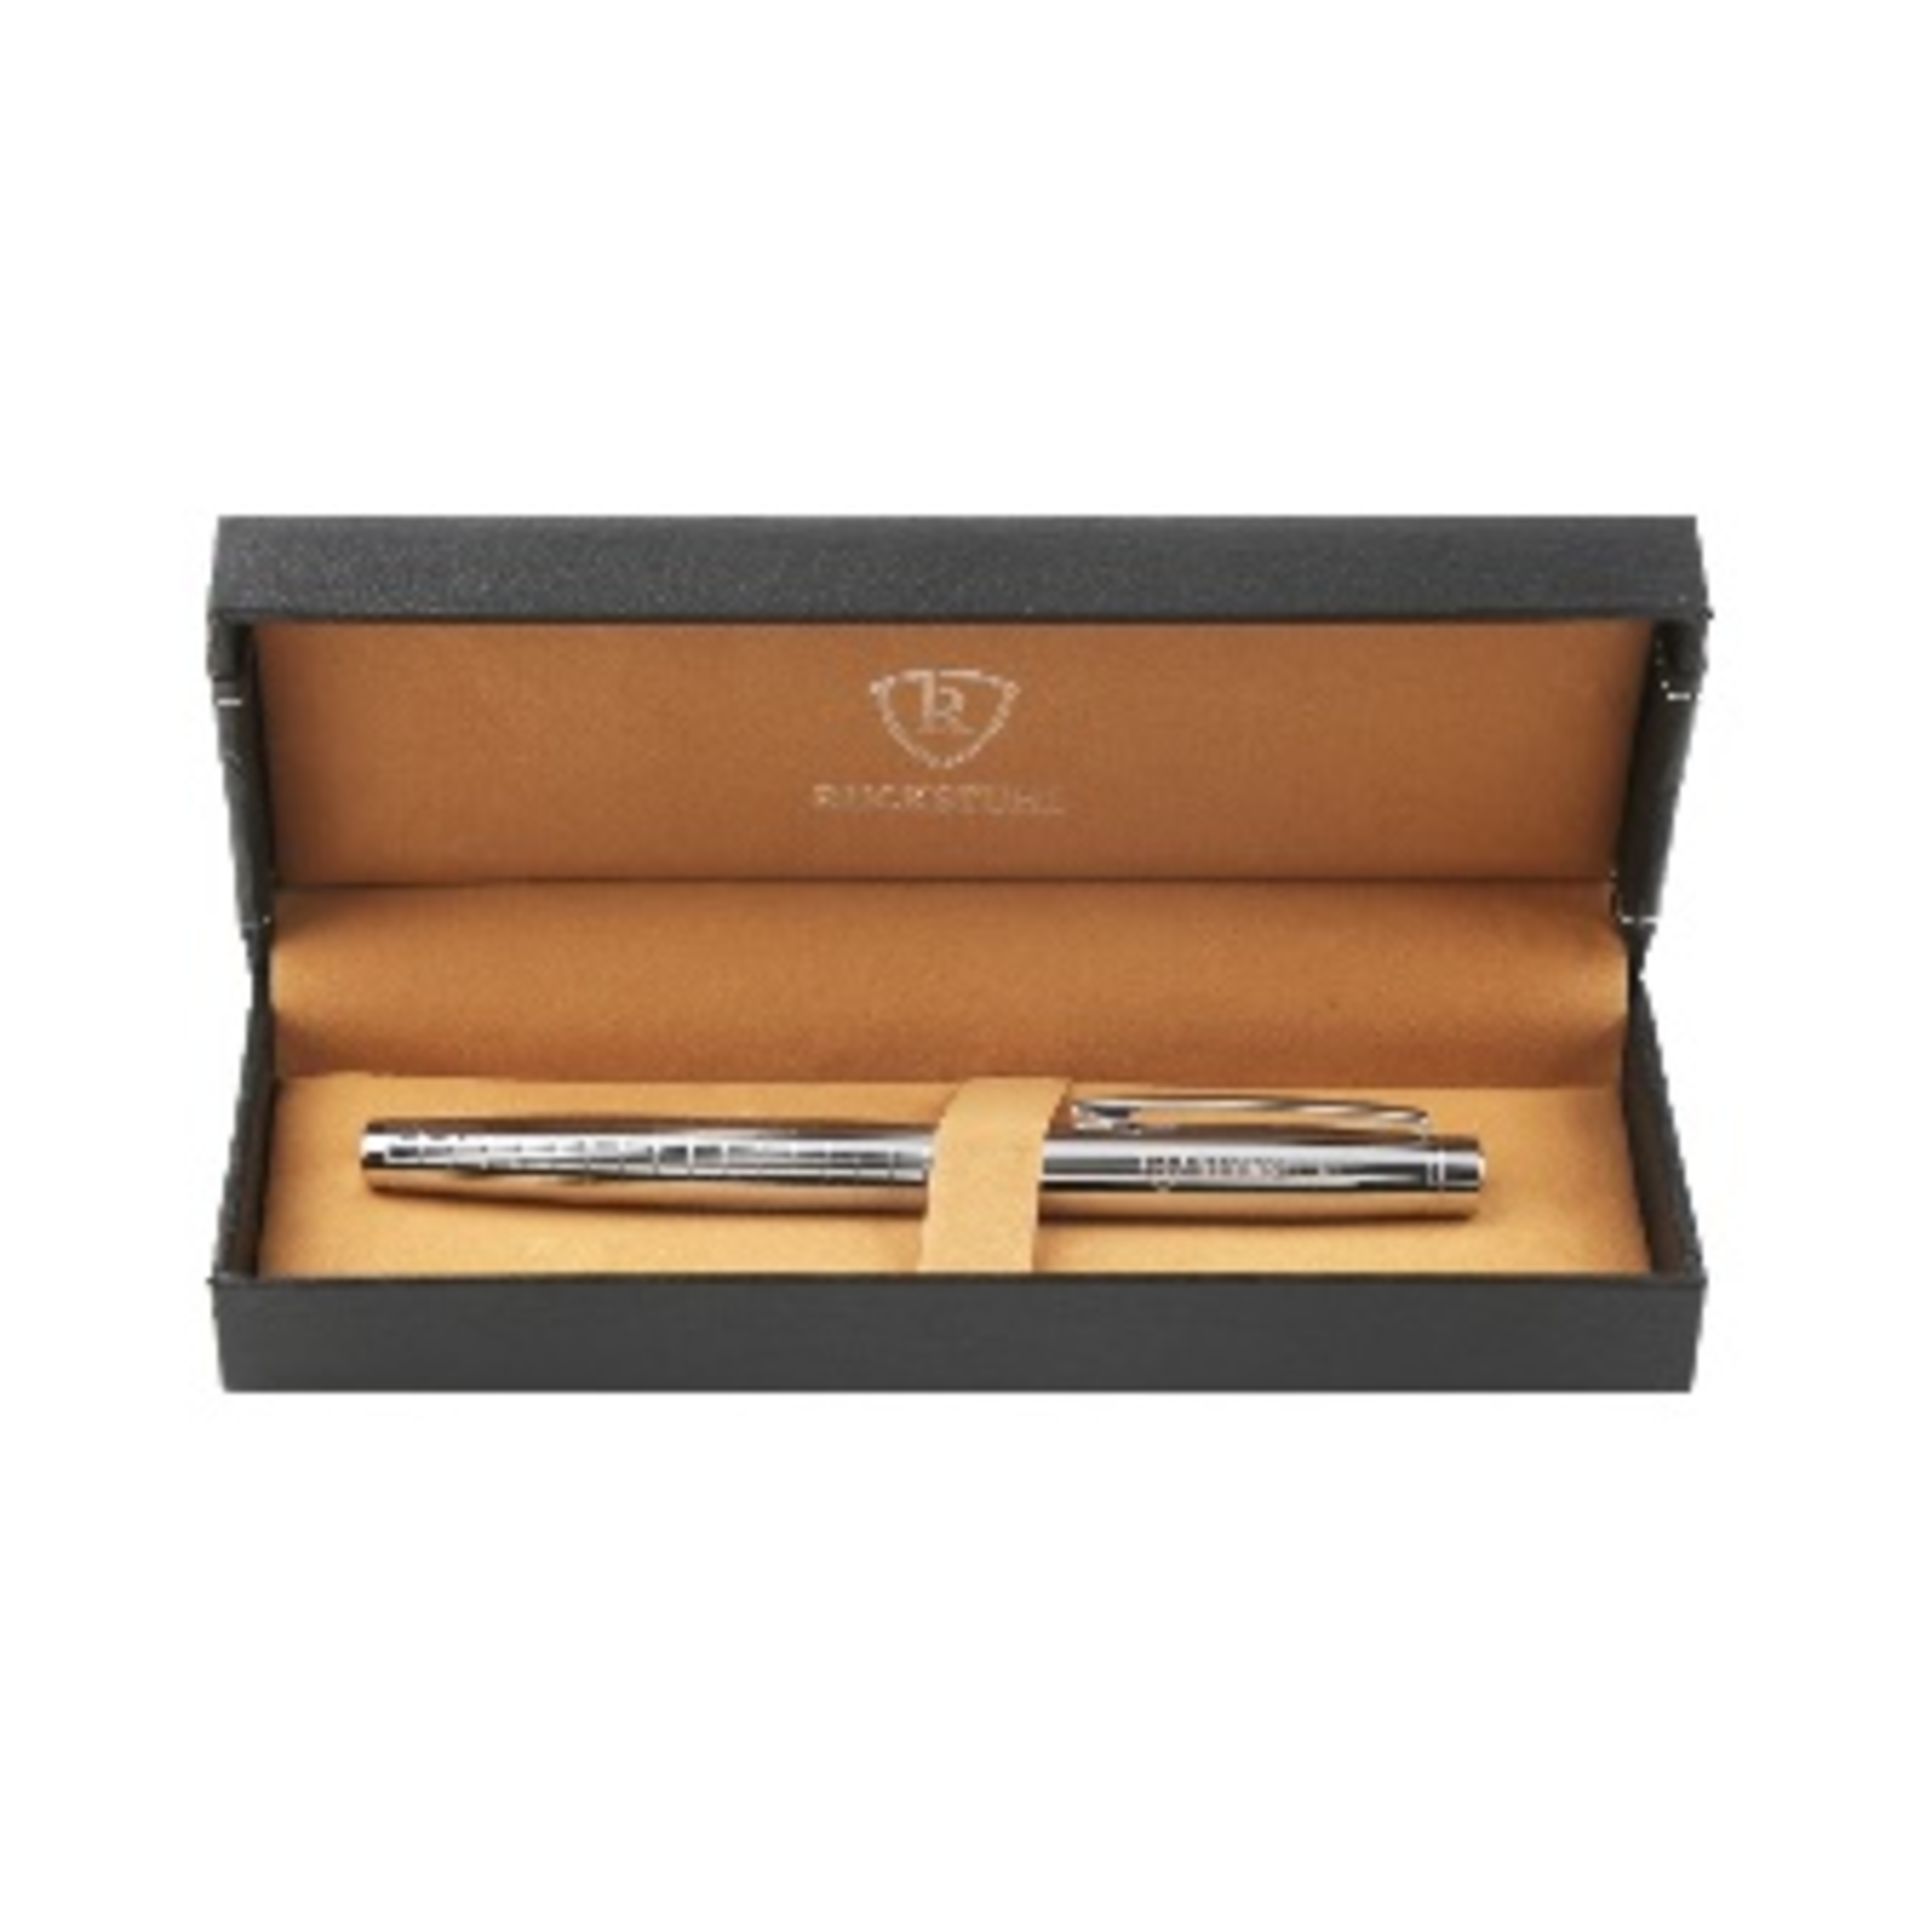 TWO RUCKSTUHL STAINLESS STEEL BALL POINT LIDDED PENS IN GIFT BOXES - Image 5 of 5